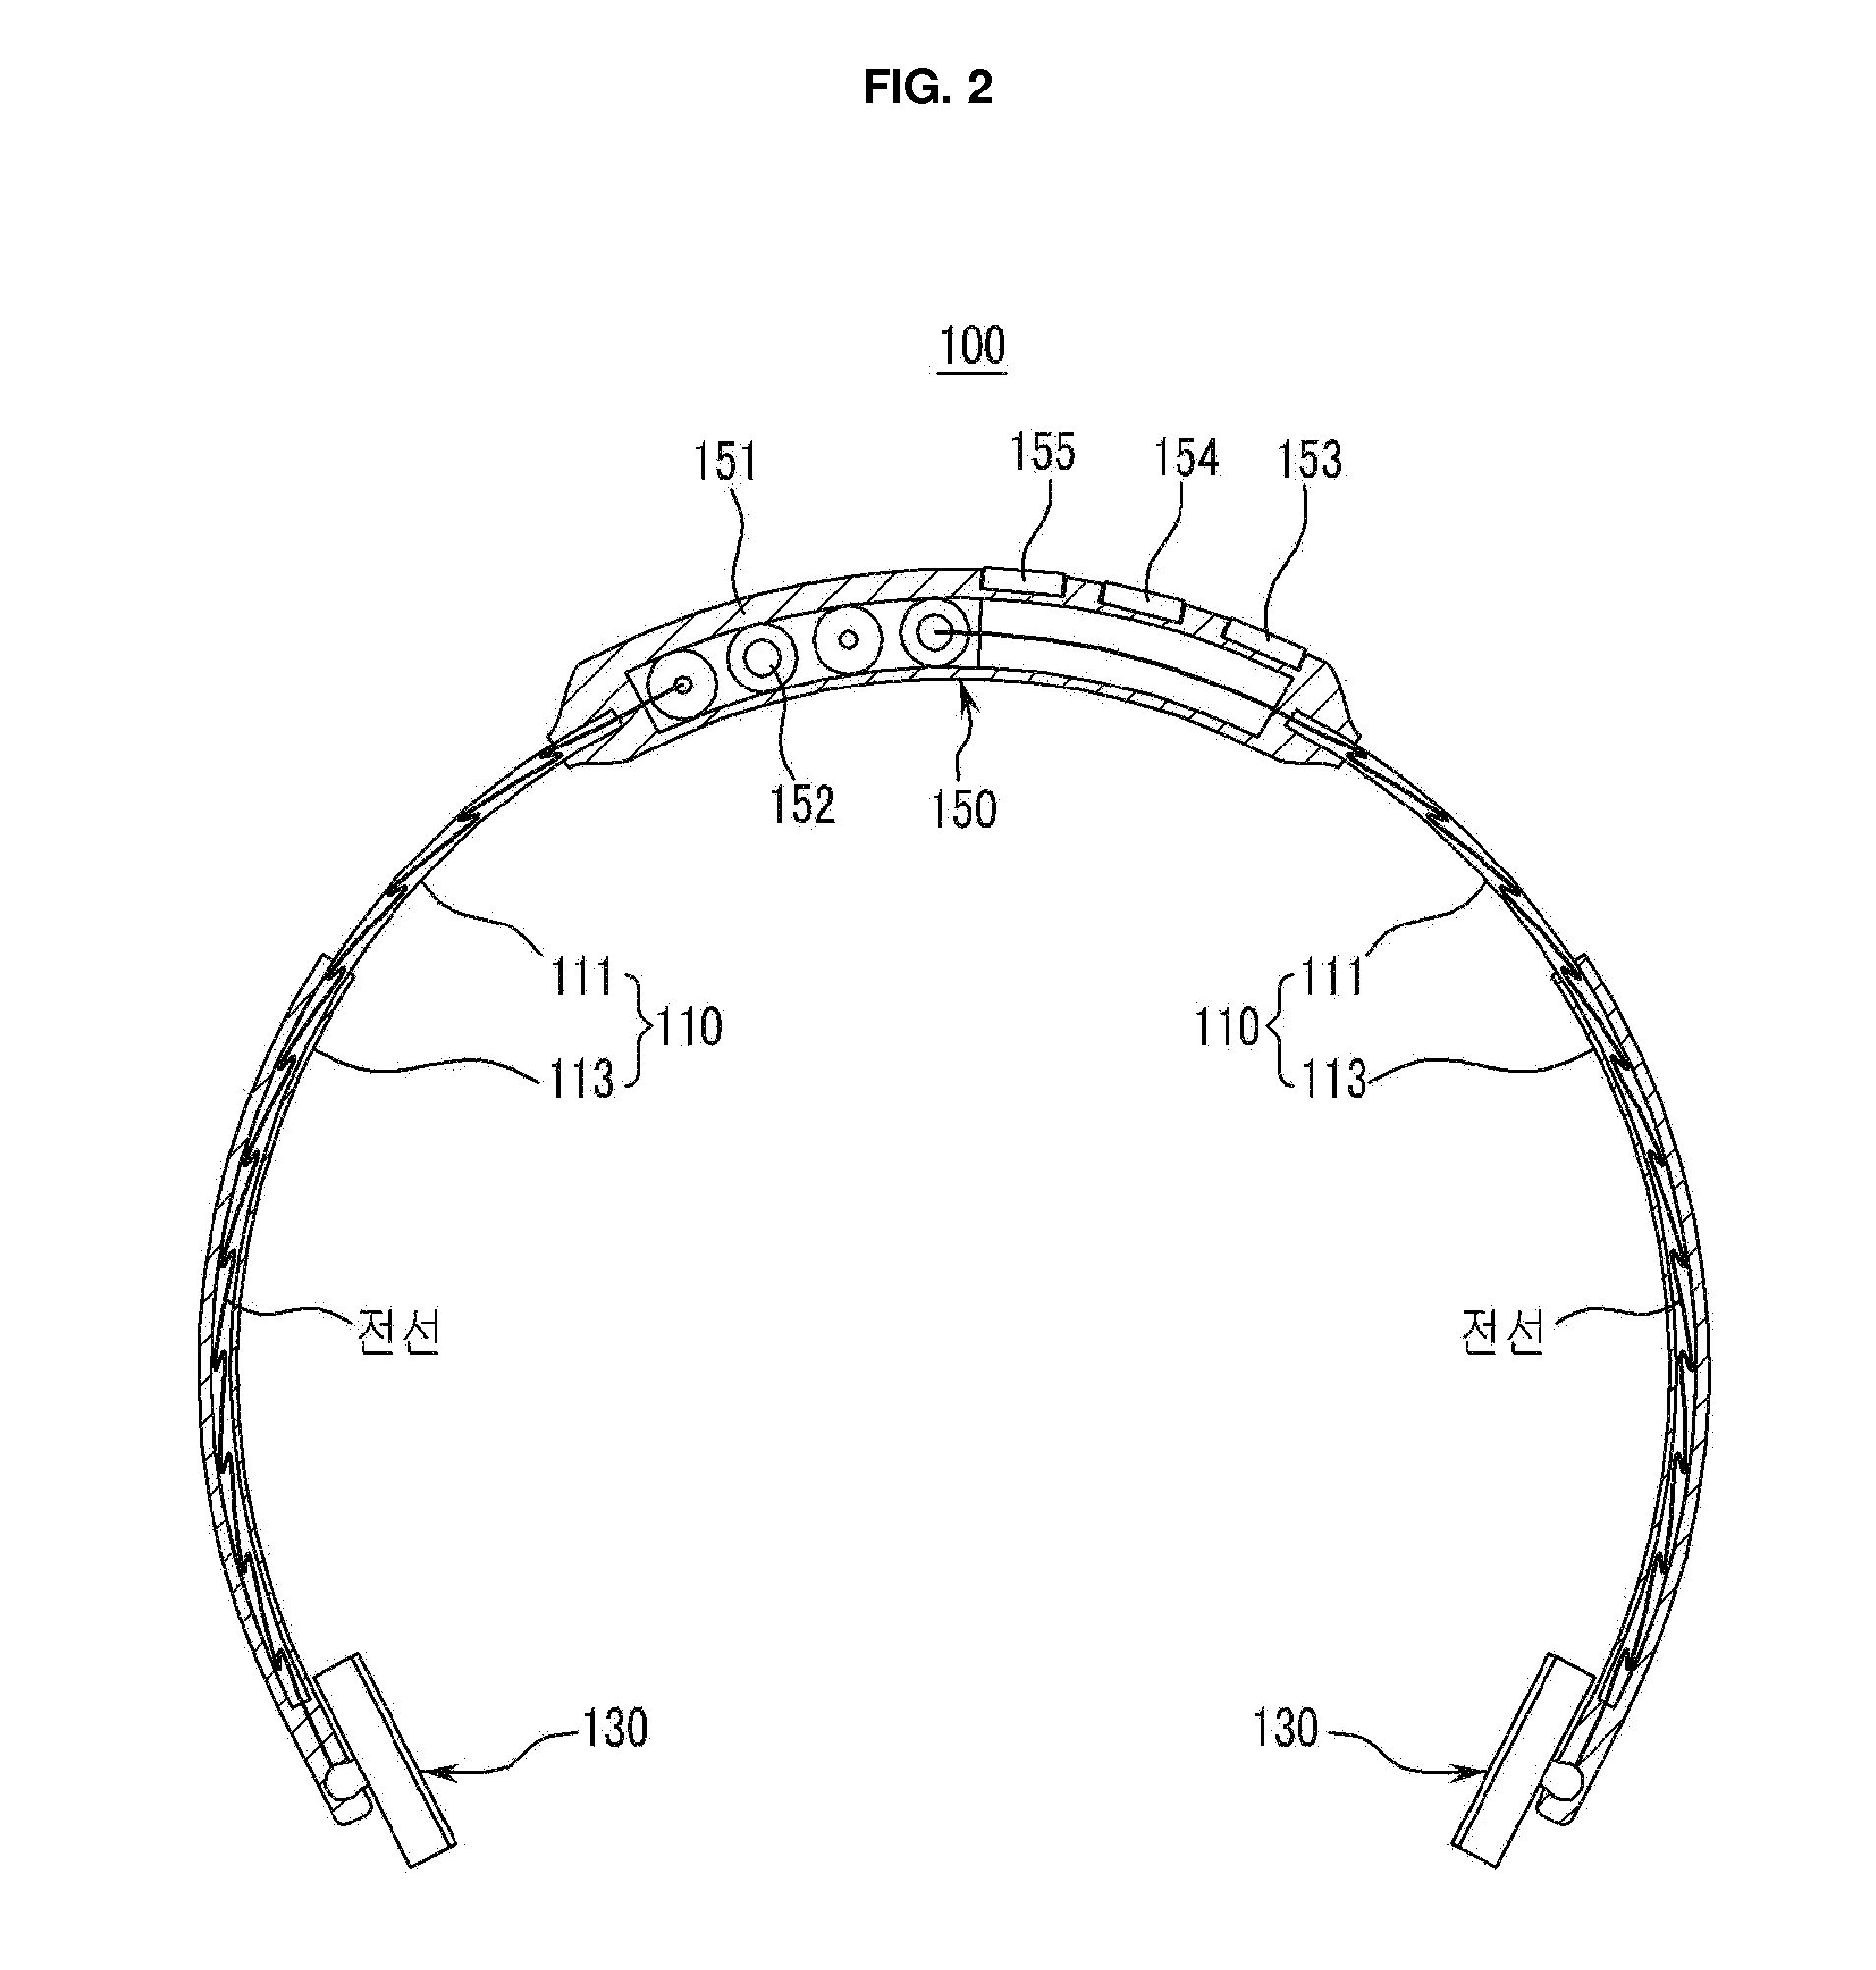 Hair band type apparatus for preventing sleepiness